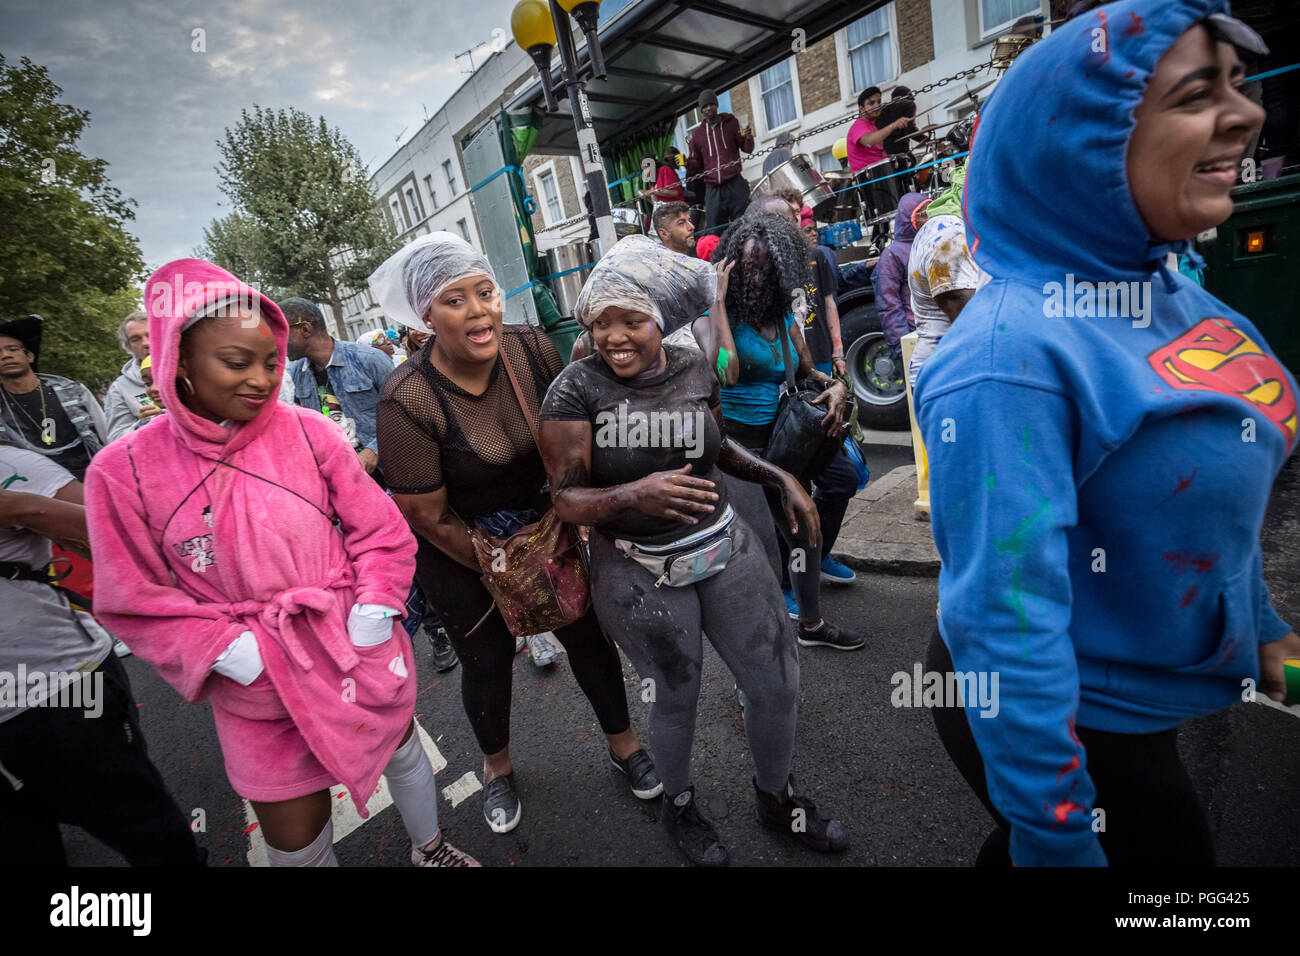 London, UK. 26th August 2018. Jouvert parade starts the Notting Hill Carnival 2018 festivities with the traditional ‘dirty’ paint, oil and coloured powder being thrown to the sounds of African drums and rhythm bands. Credit: Guy Corbishley / Alamy Live News Stock Photo